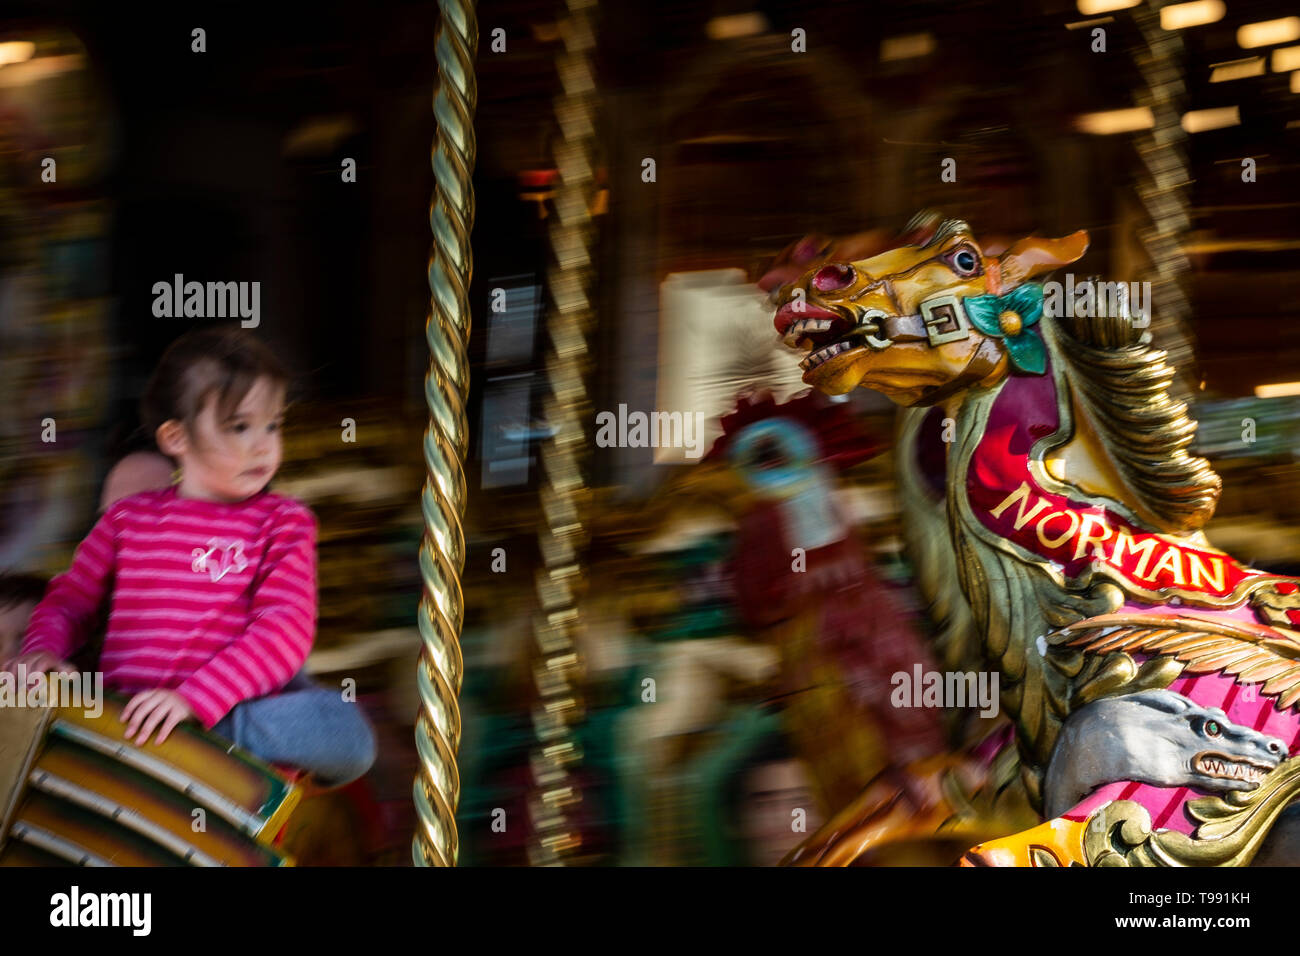 Steam powered carousel in action. Stock Photo